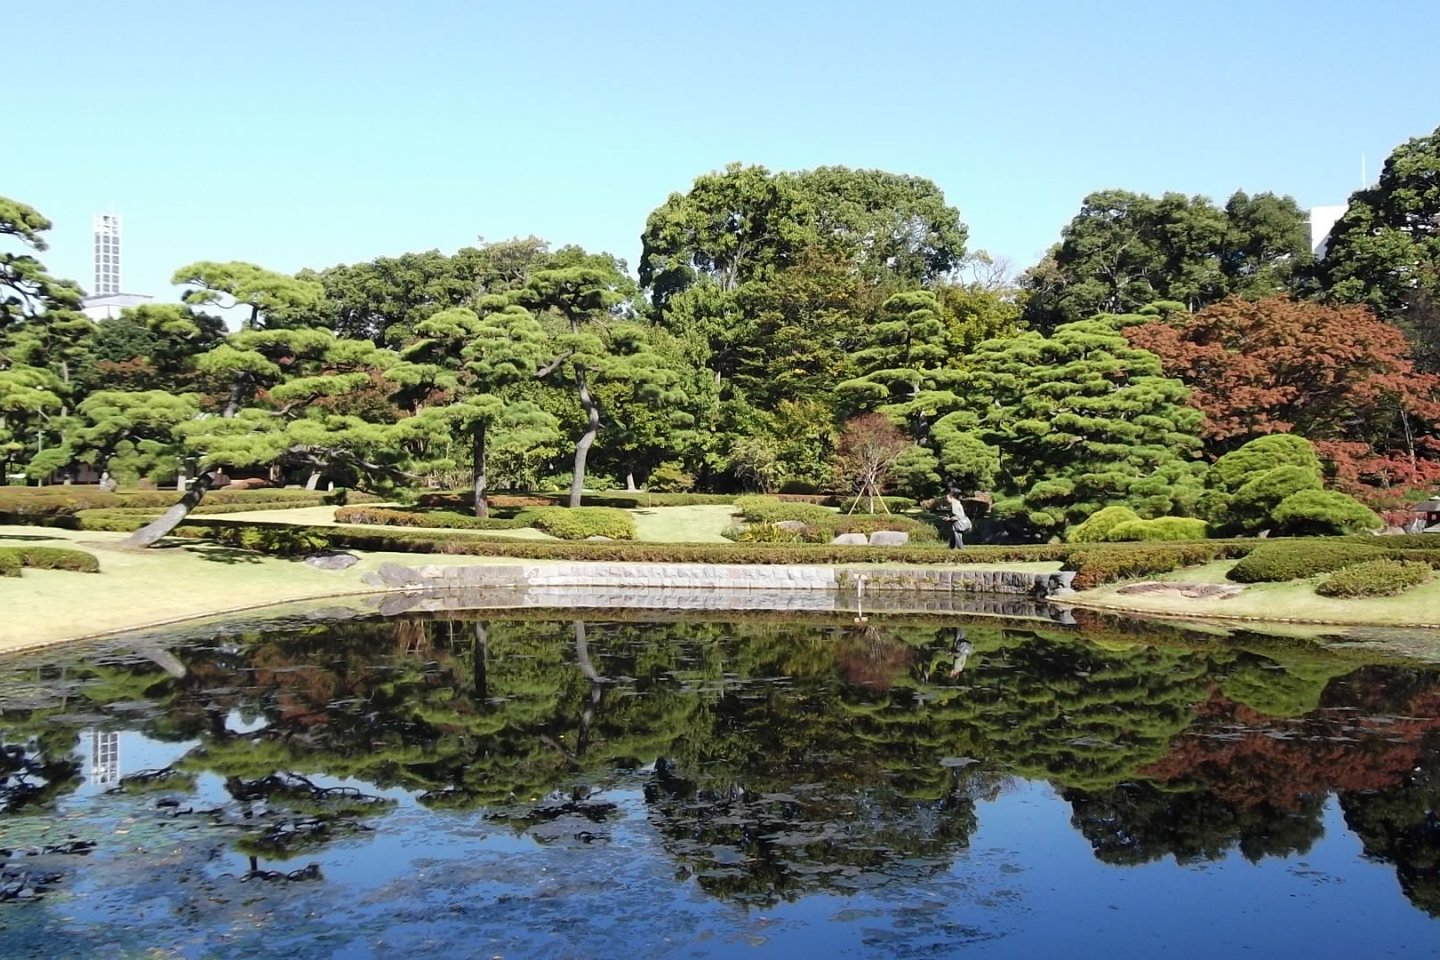 The east garden of the Imperial Palace